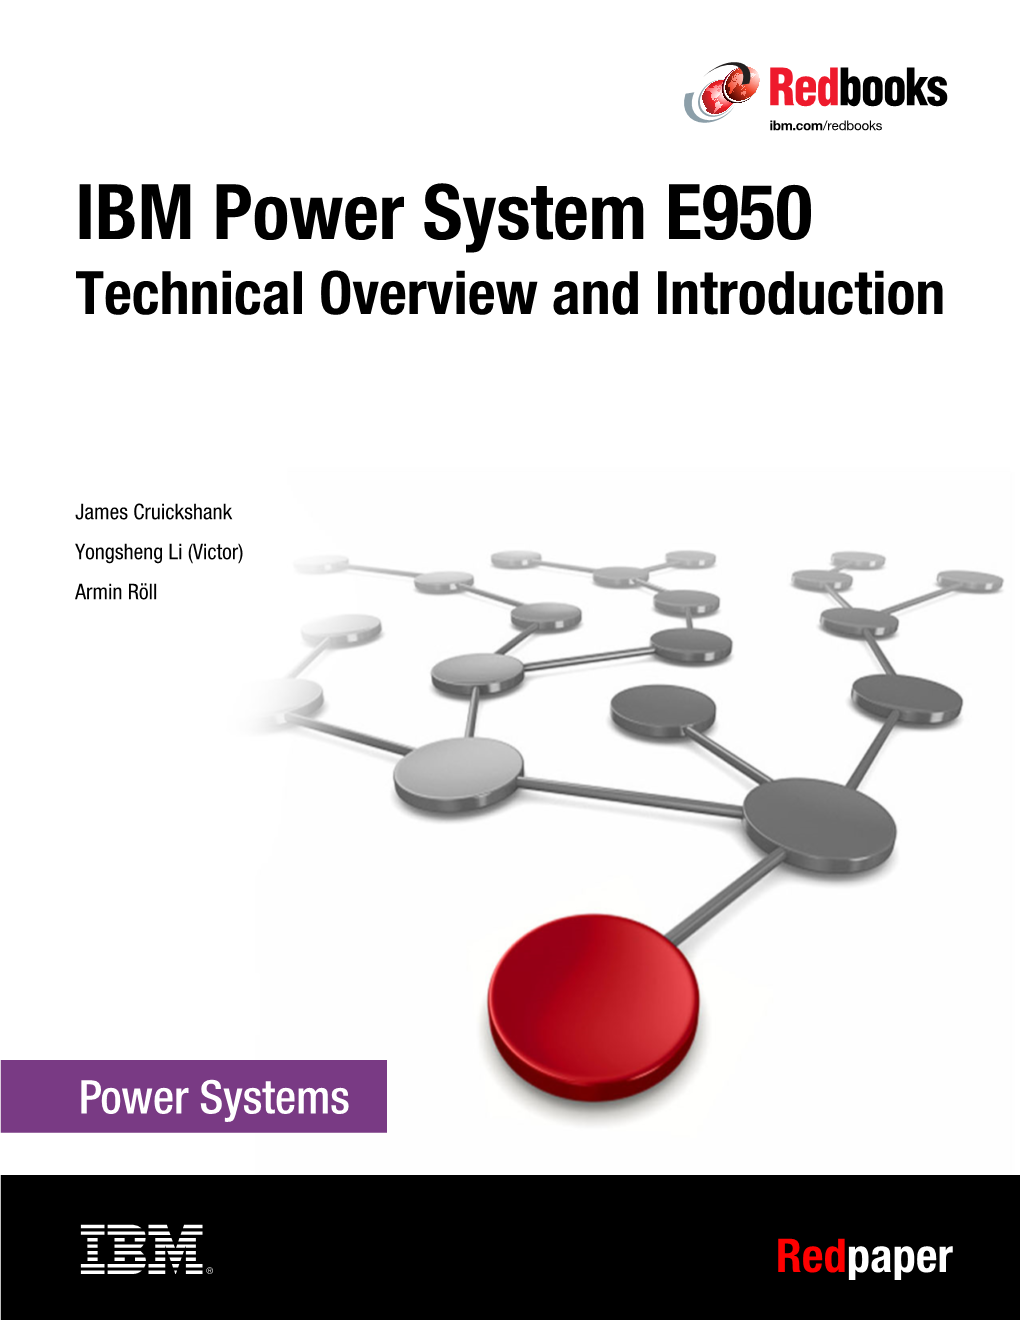 IBM Power System E950 Technical Overview and Introduction